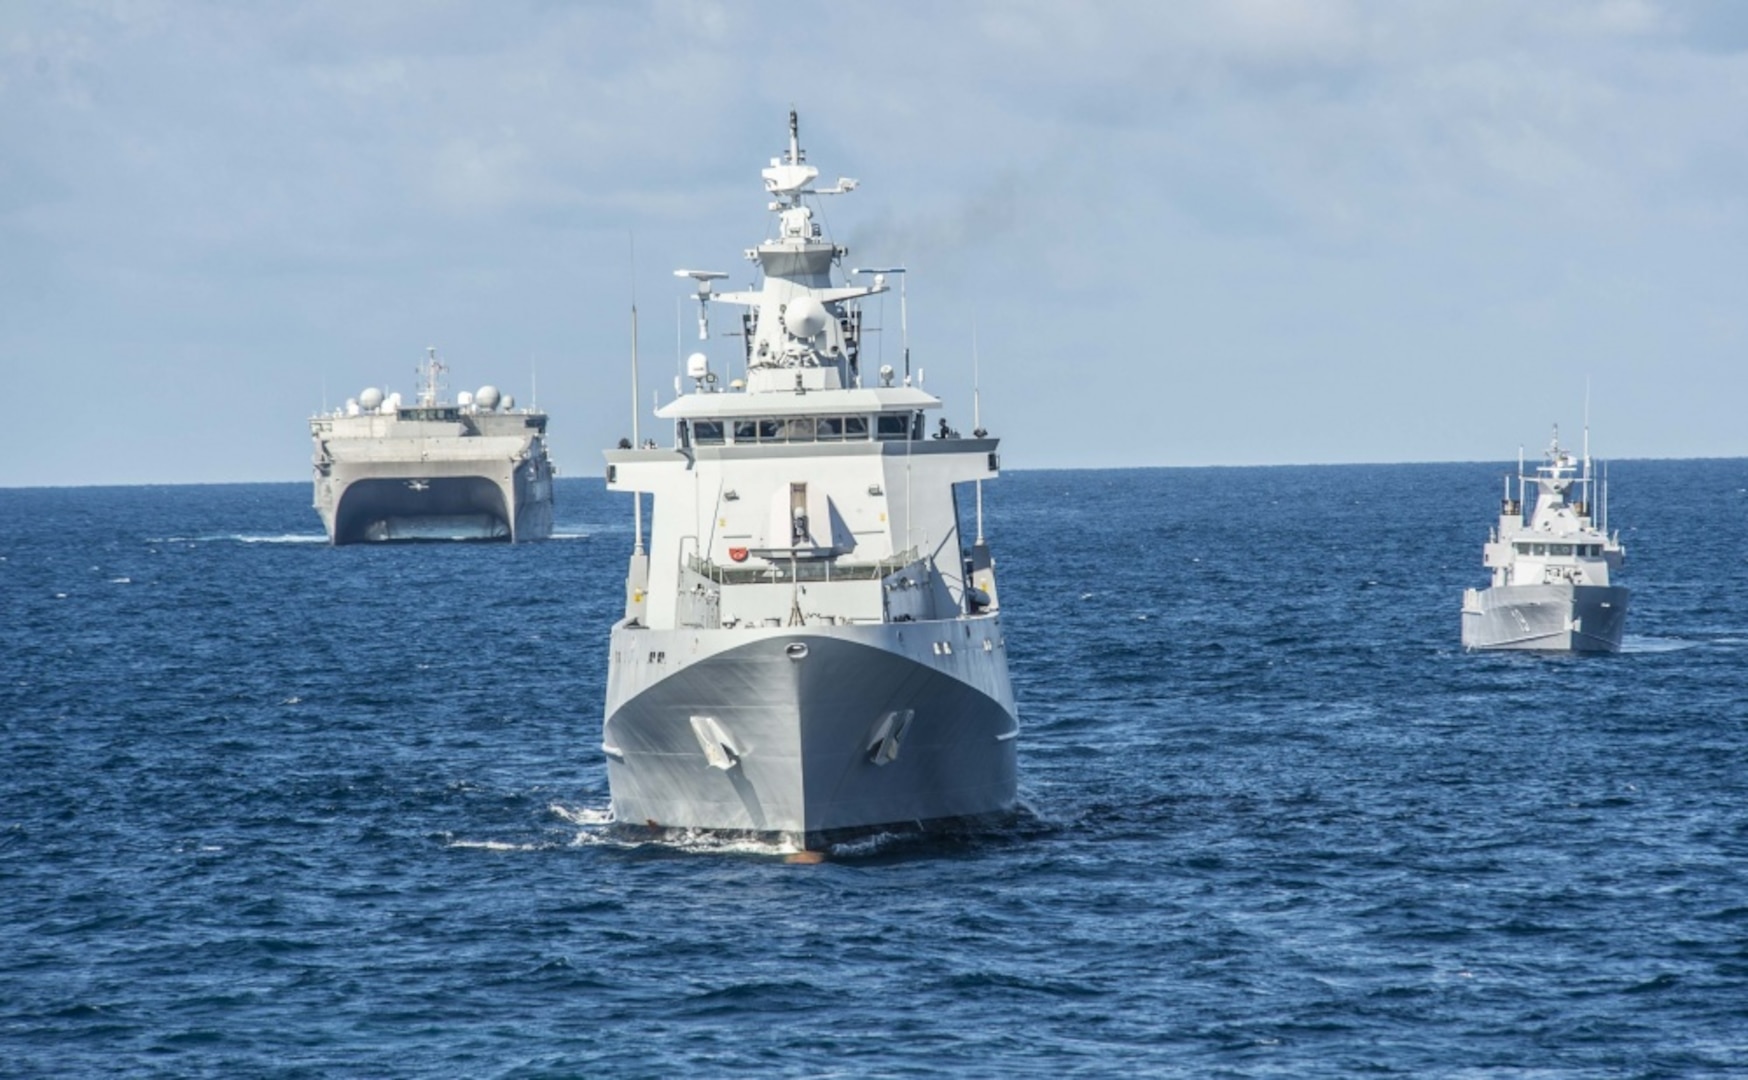 This year marks the 25th iteration of CARAT, a multinational exercise designed to enhance U.S. and partner navies' abilities to operate together in response to traditional and non-traditional maritime security challenges in the Indo-Pacific region.